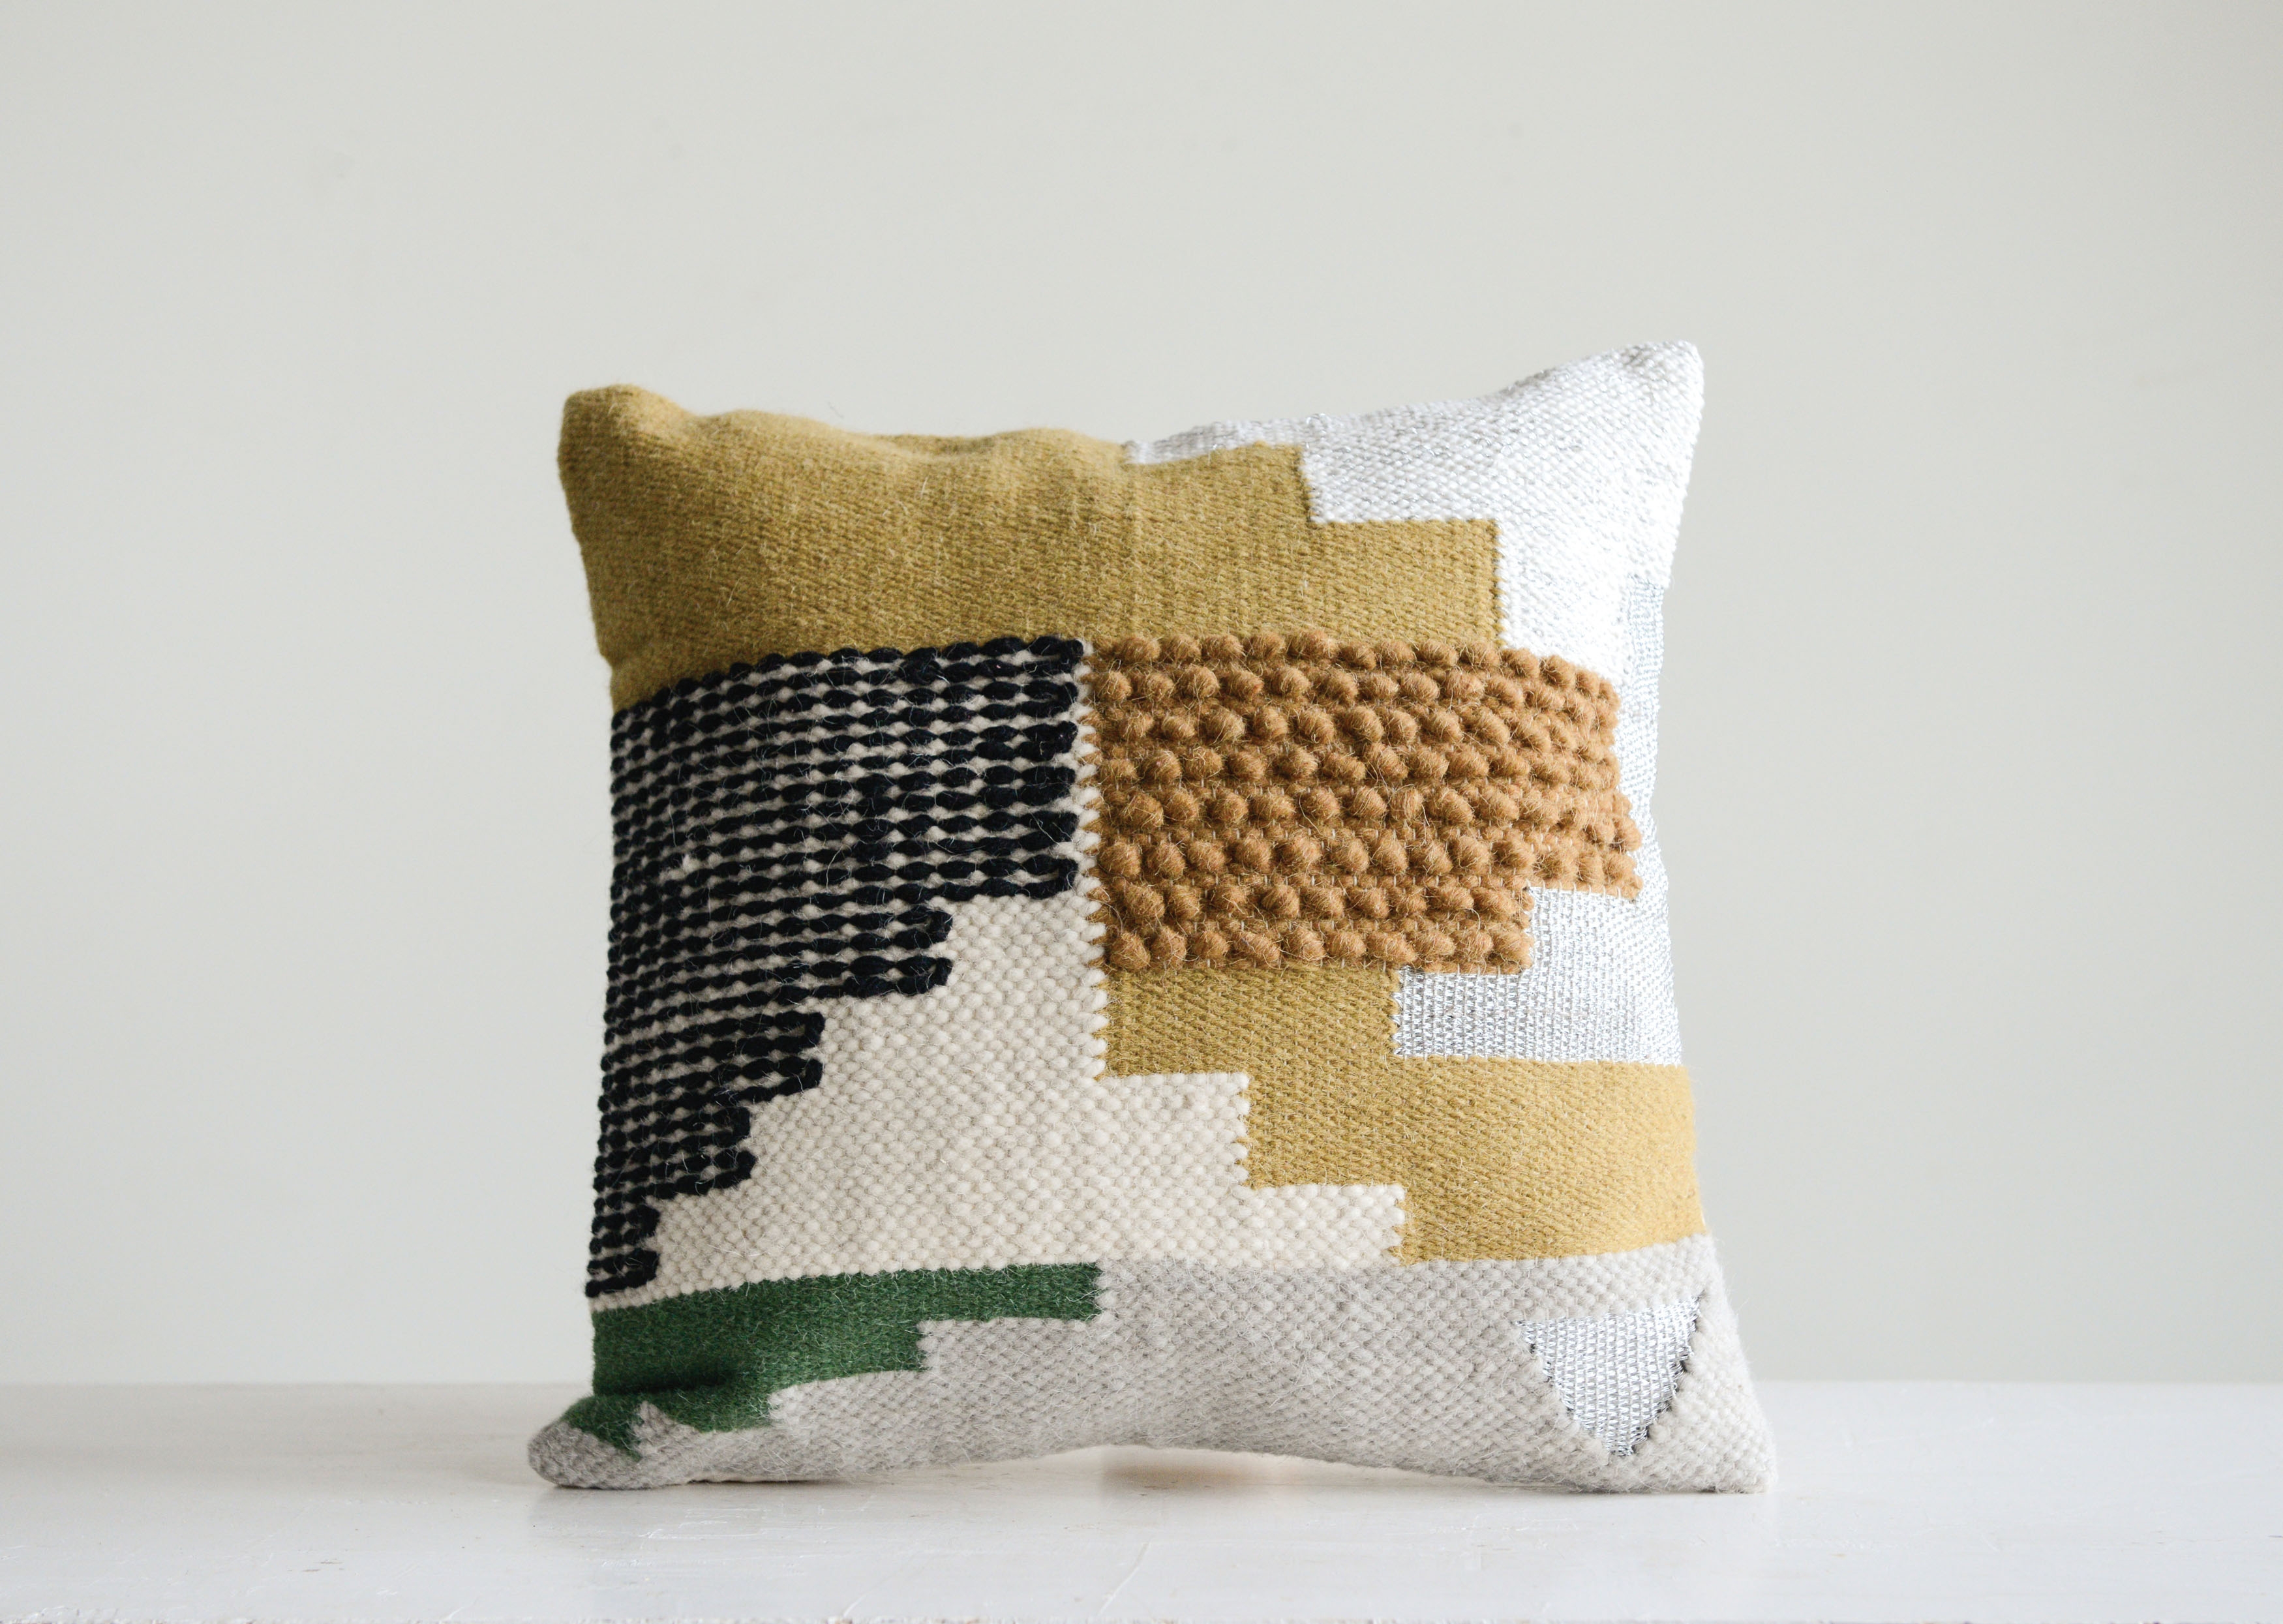 Handwoven White Wool Kilim Pillow with Yellow, Green & Black Accents - Image 9